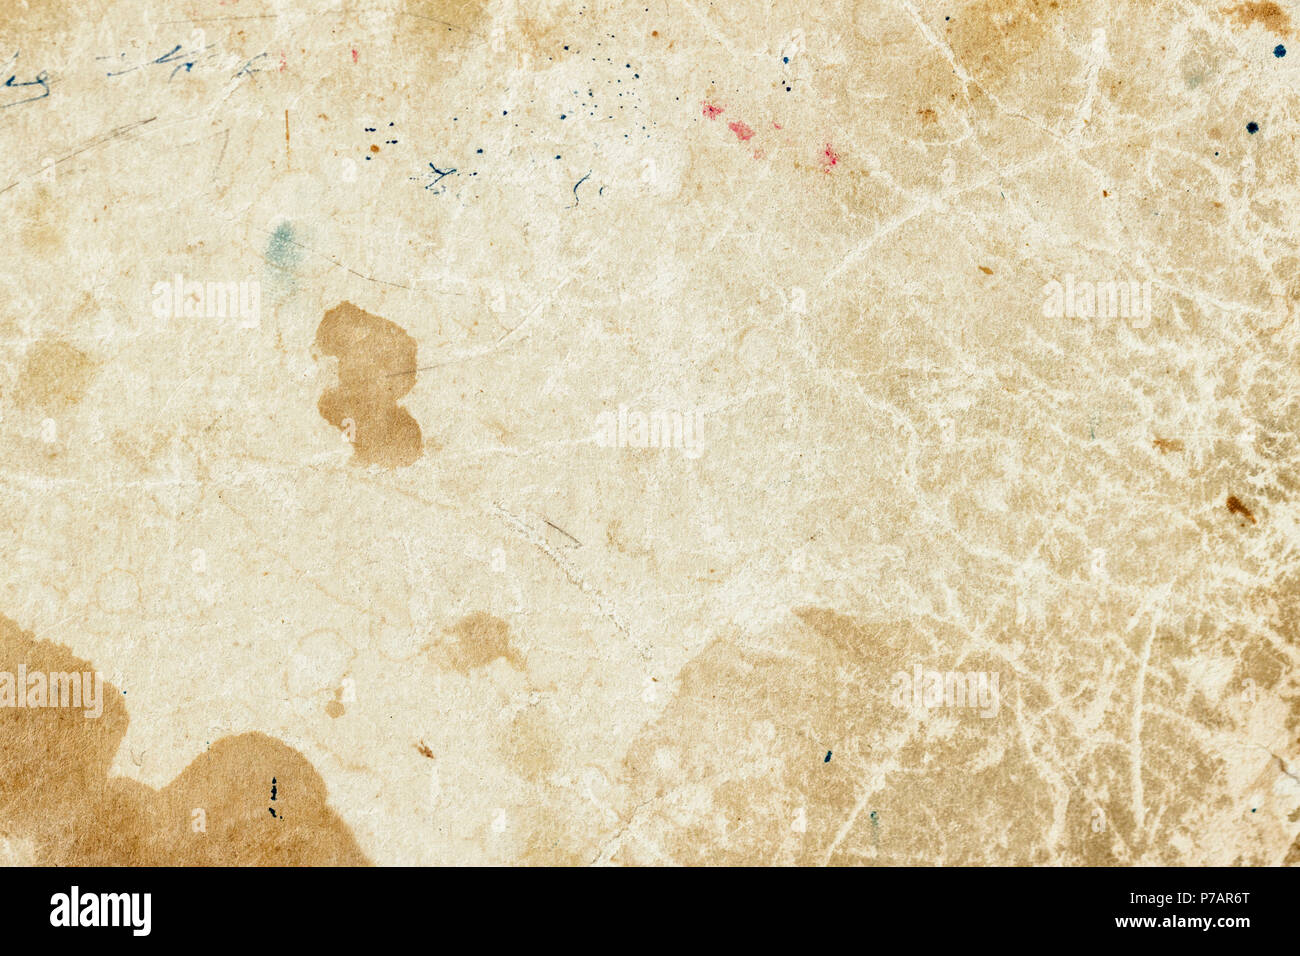 Texture of old moldy paper with dirt stains, spots, inclusions cellulose, cardboard texture background, grunge vintage background Photo - Alamy